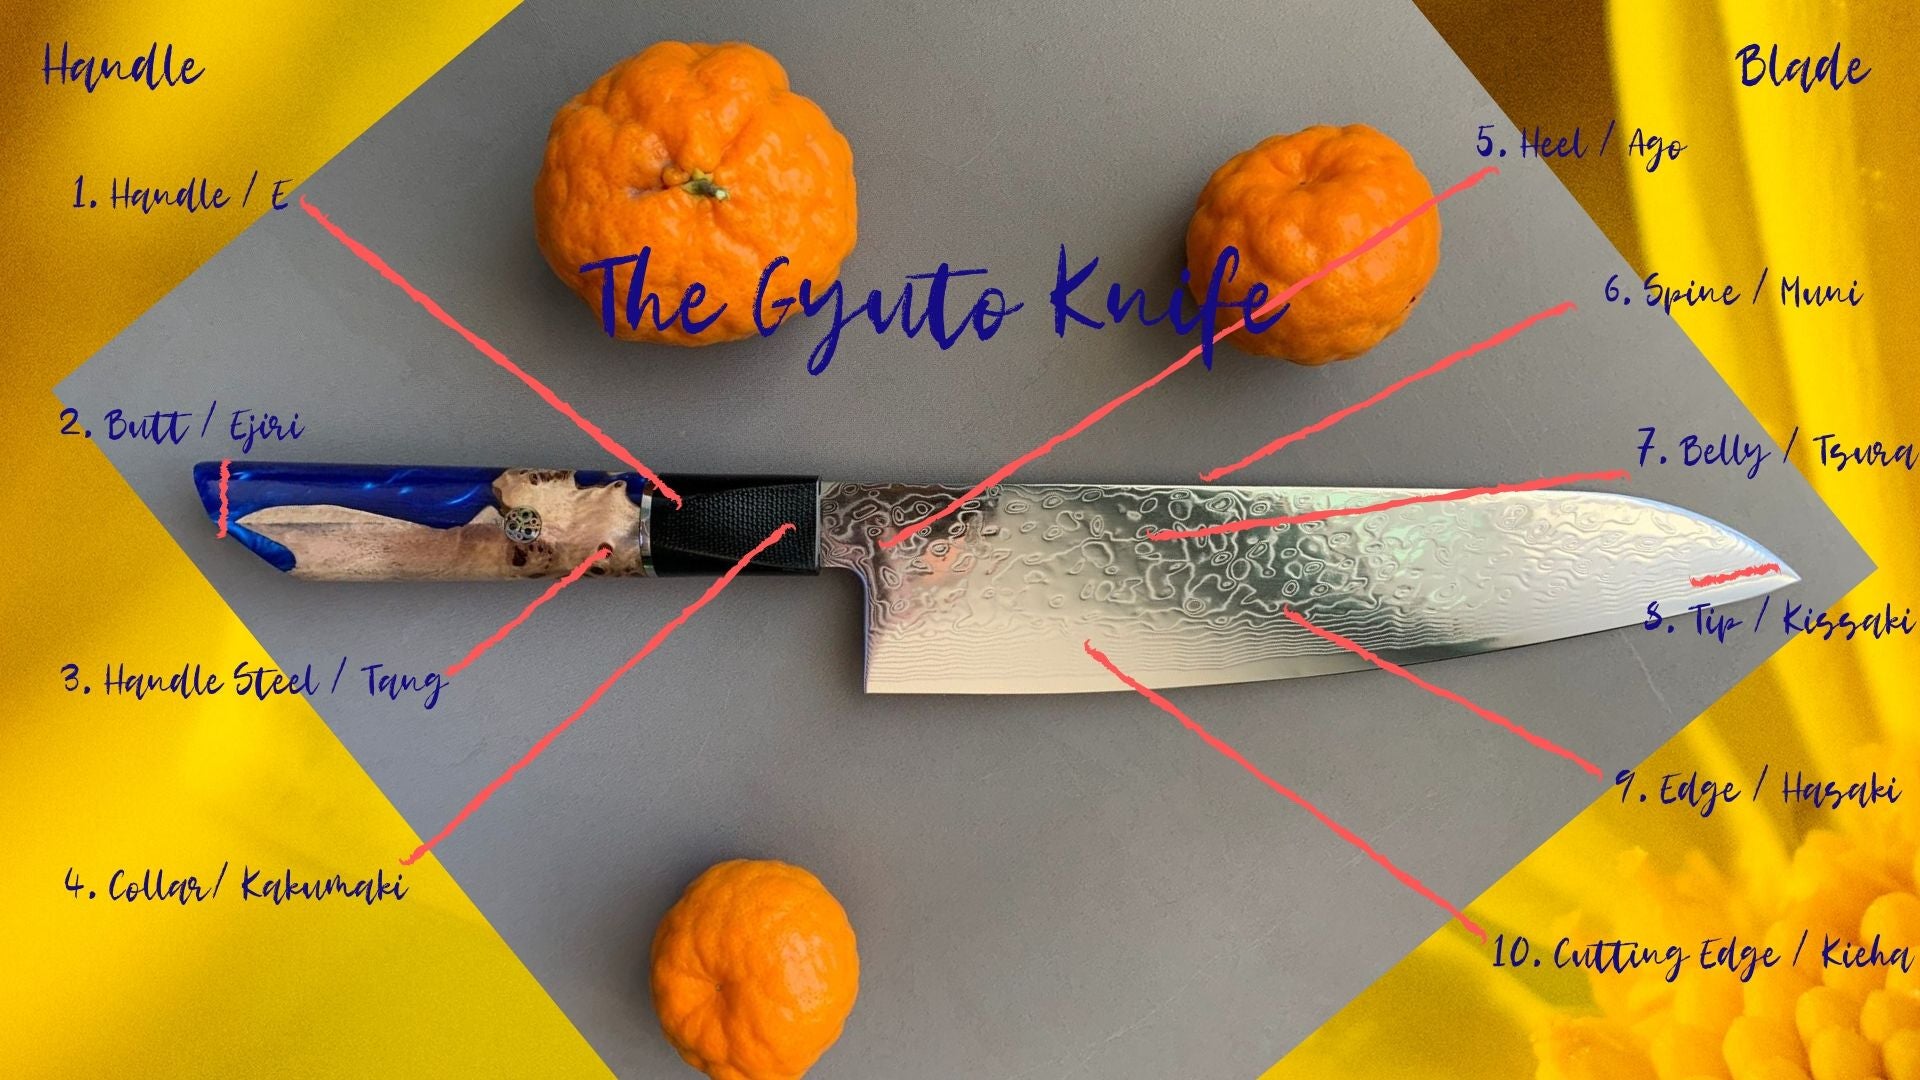 The Anatomy of a Chef's Knife